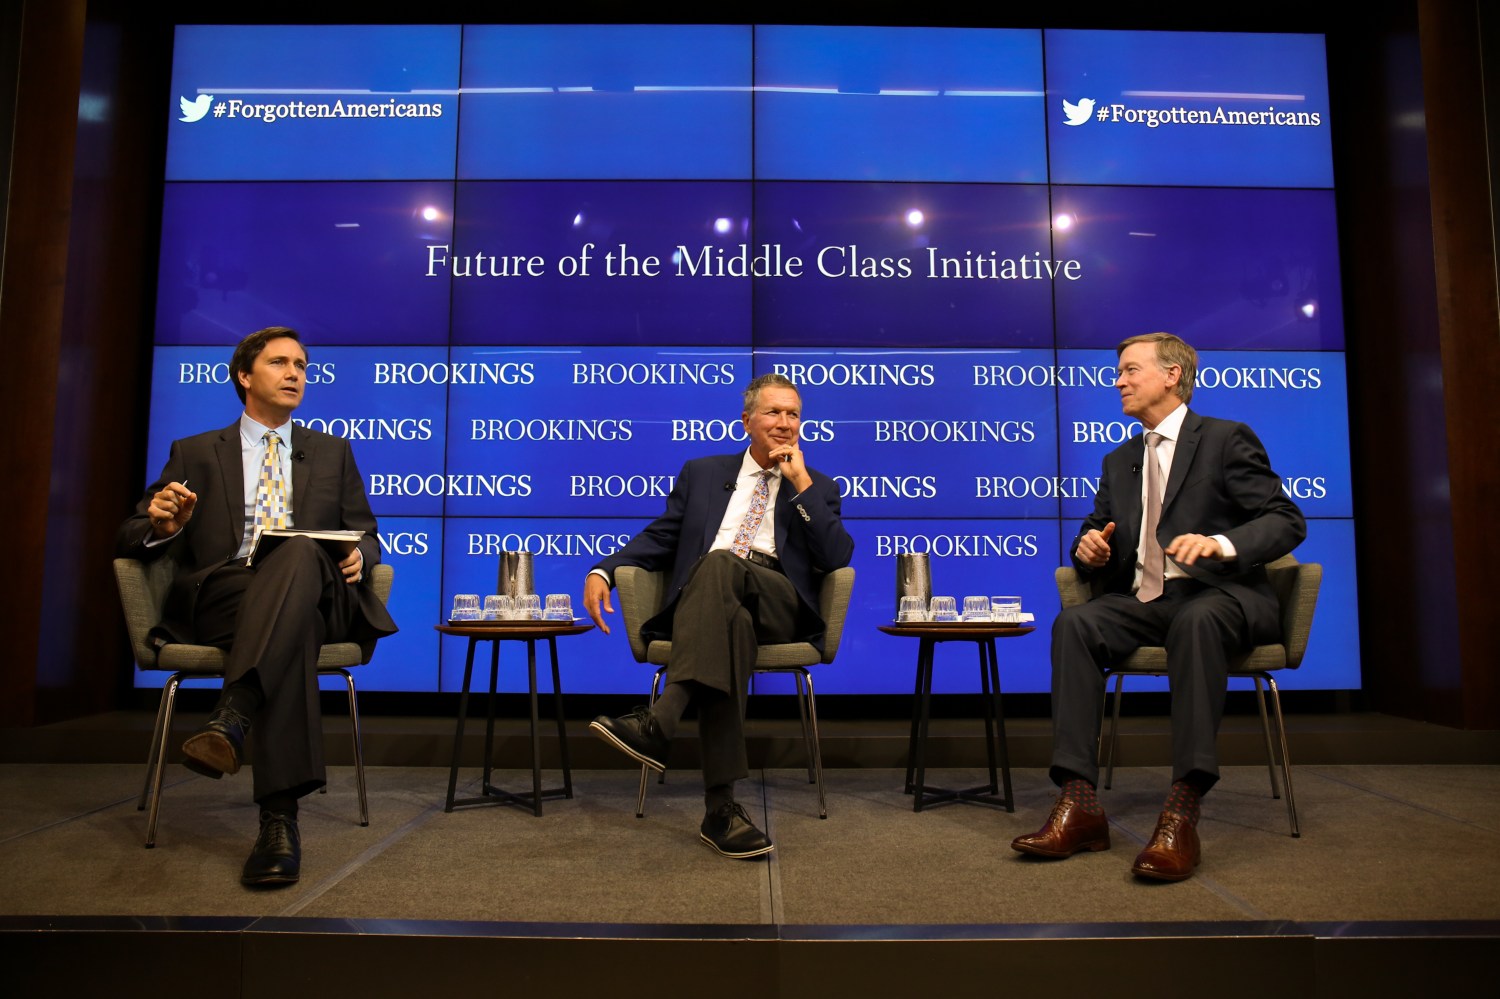 Governors Kasich and Hickenlooper talk with Brookings Senior Fellow Richard Reeves at the launch event for Isabel Sawhill's book, The Forgotten Americans, on October 10, 2018.